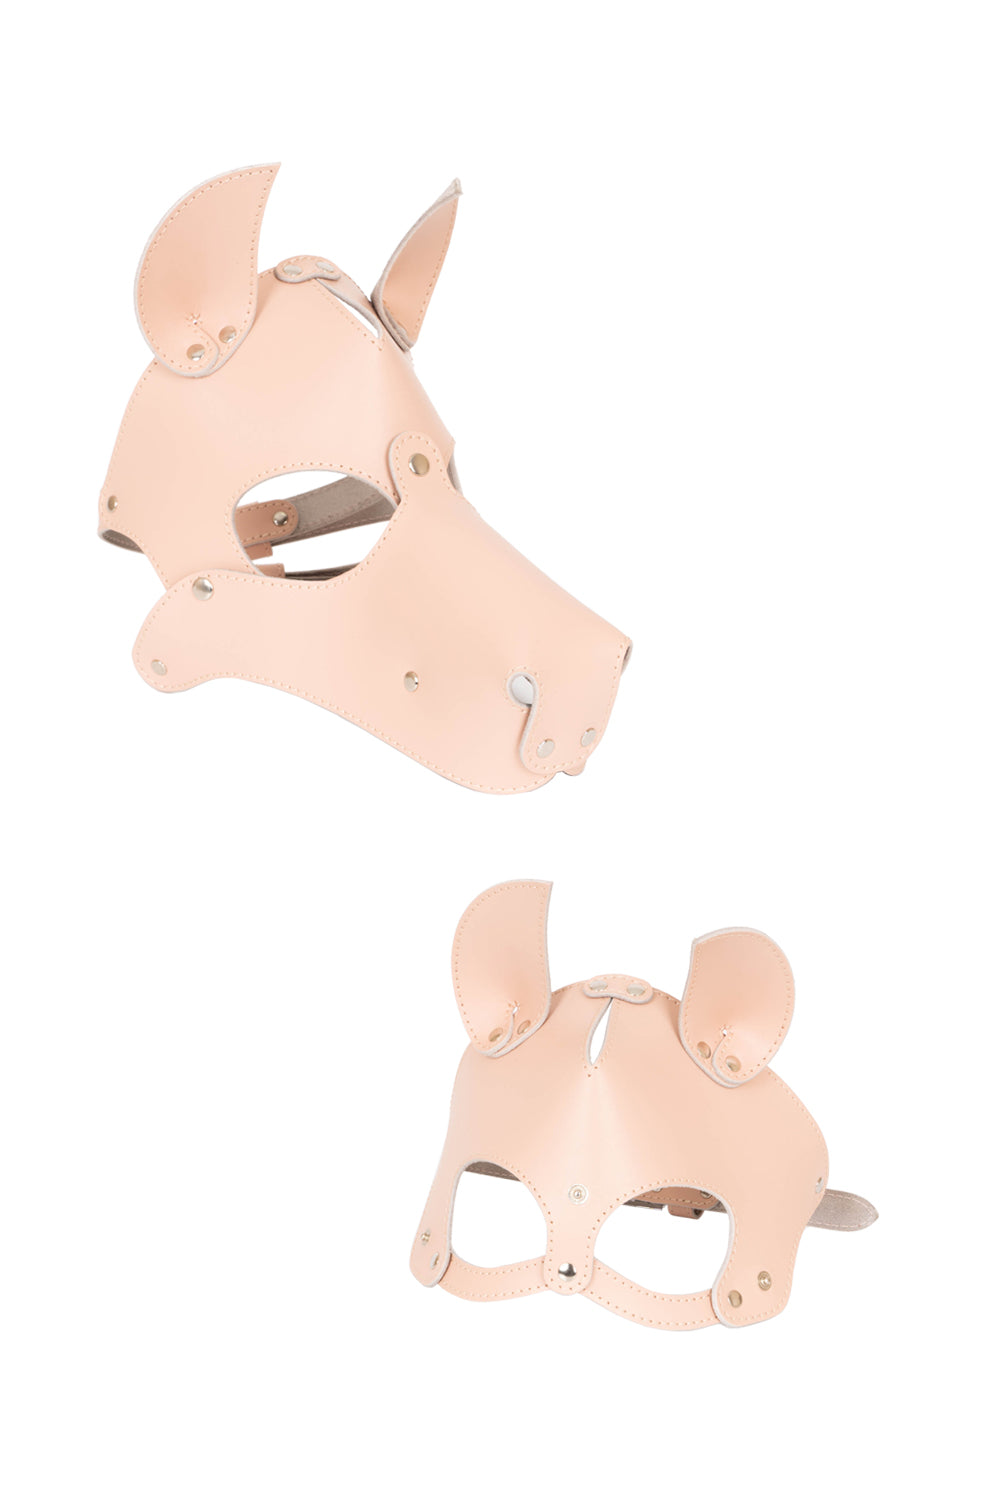 Dog mask with detachable muzzle. Red